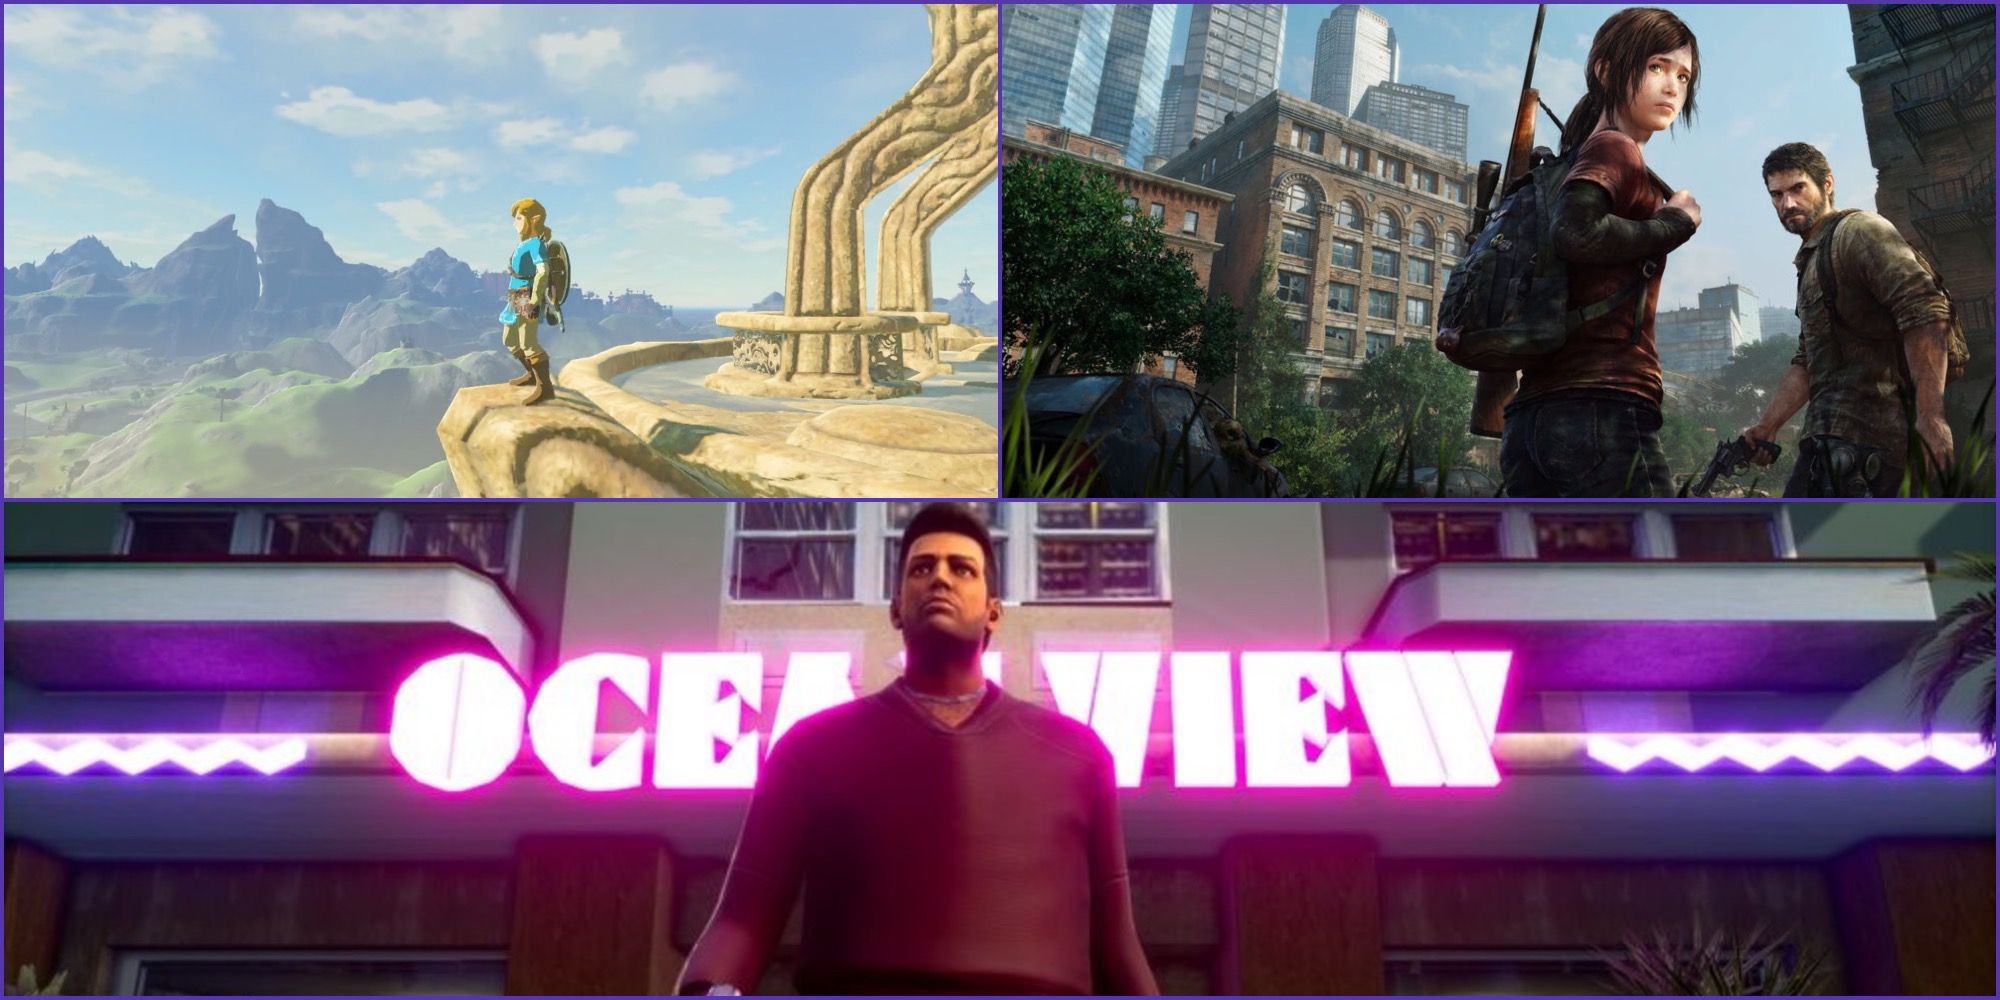 Best Years in Gaming - Feature - Link, Joel, Ellie and Tommy Vercetti ready for an adventure